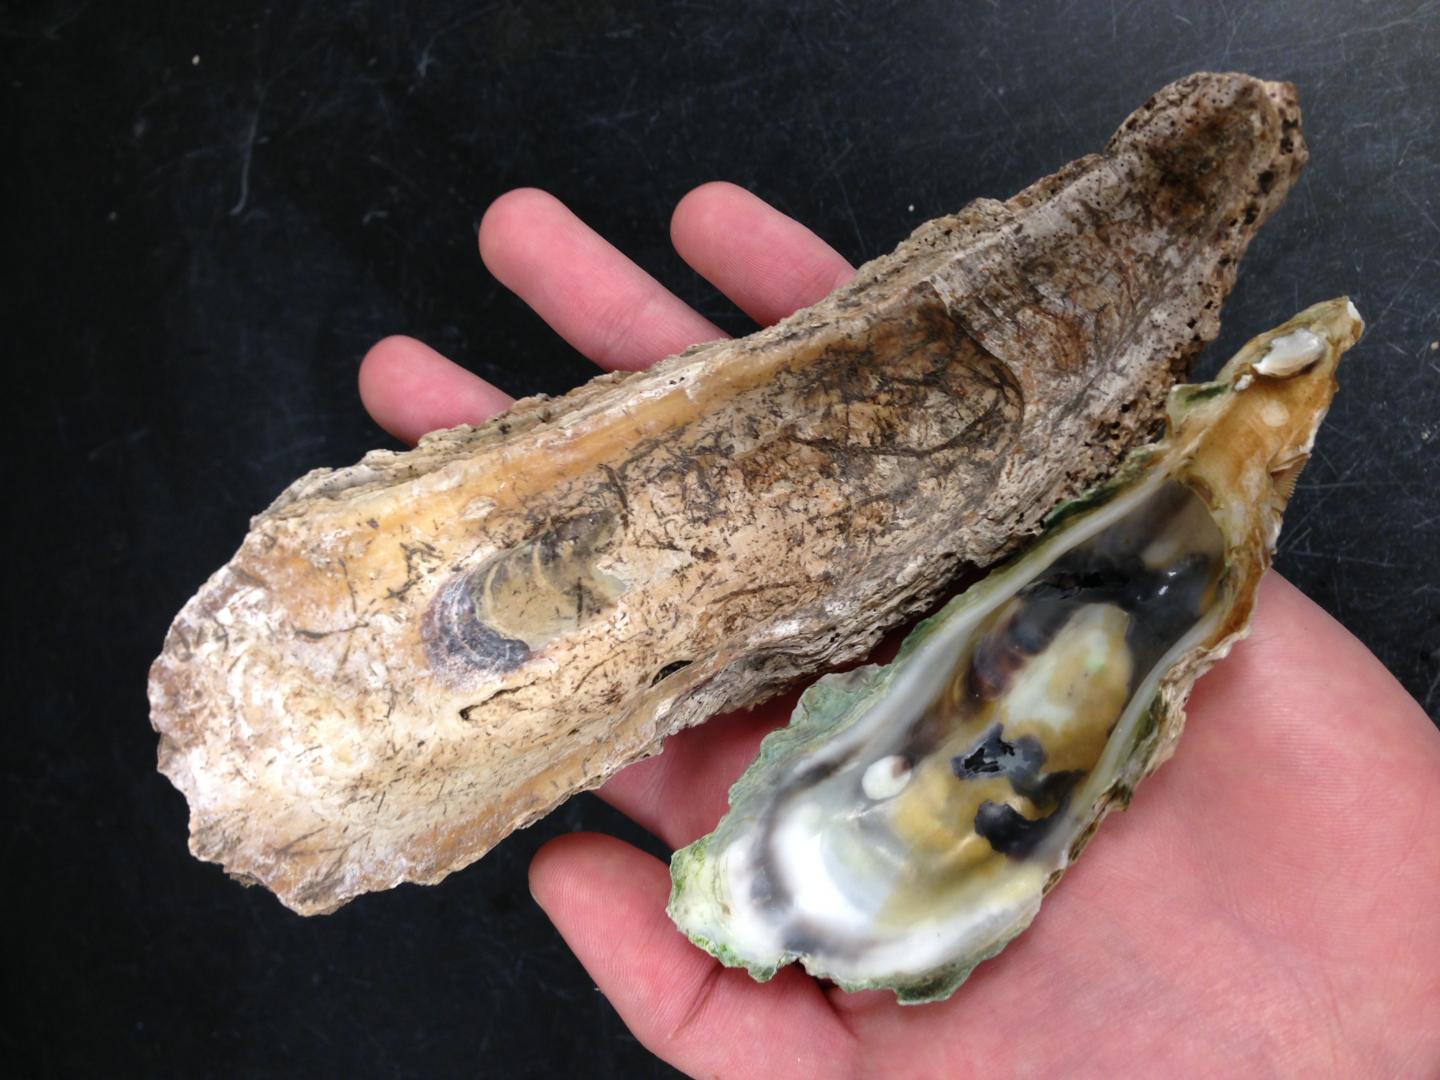 Colossal Oyster Compared to Modern Day Oyster